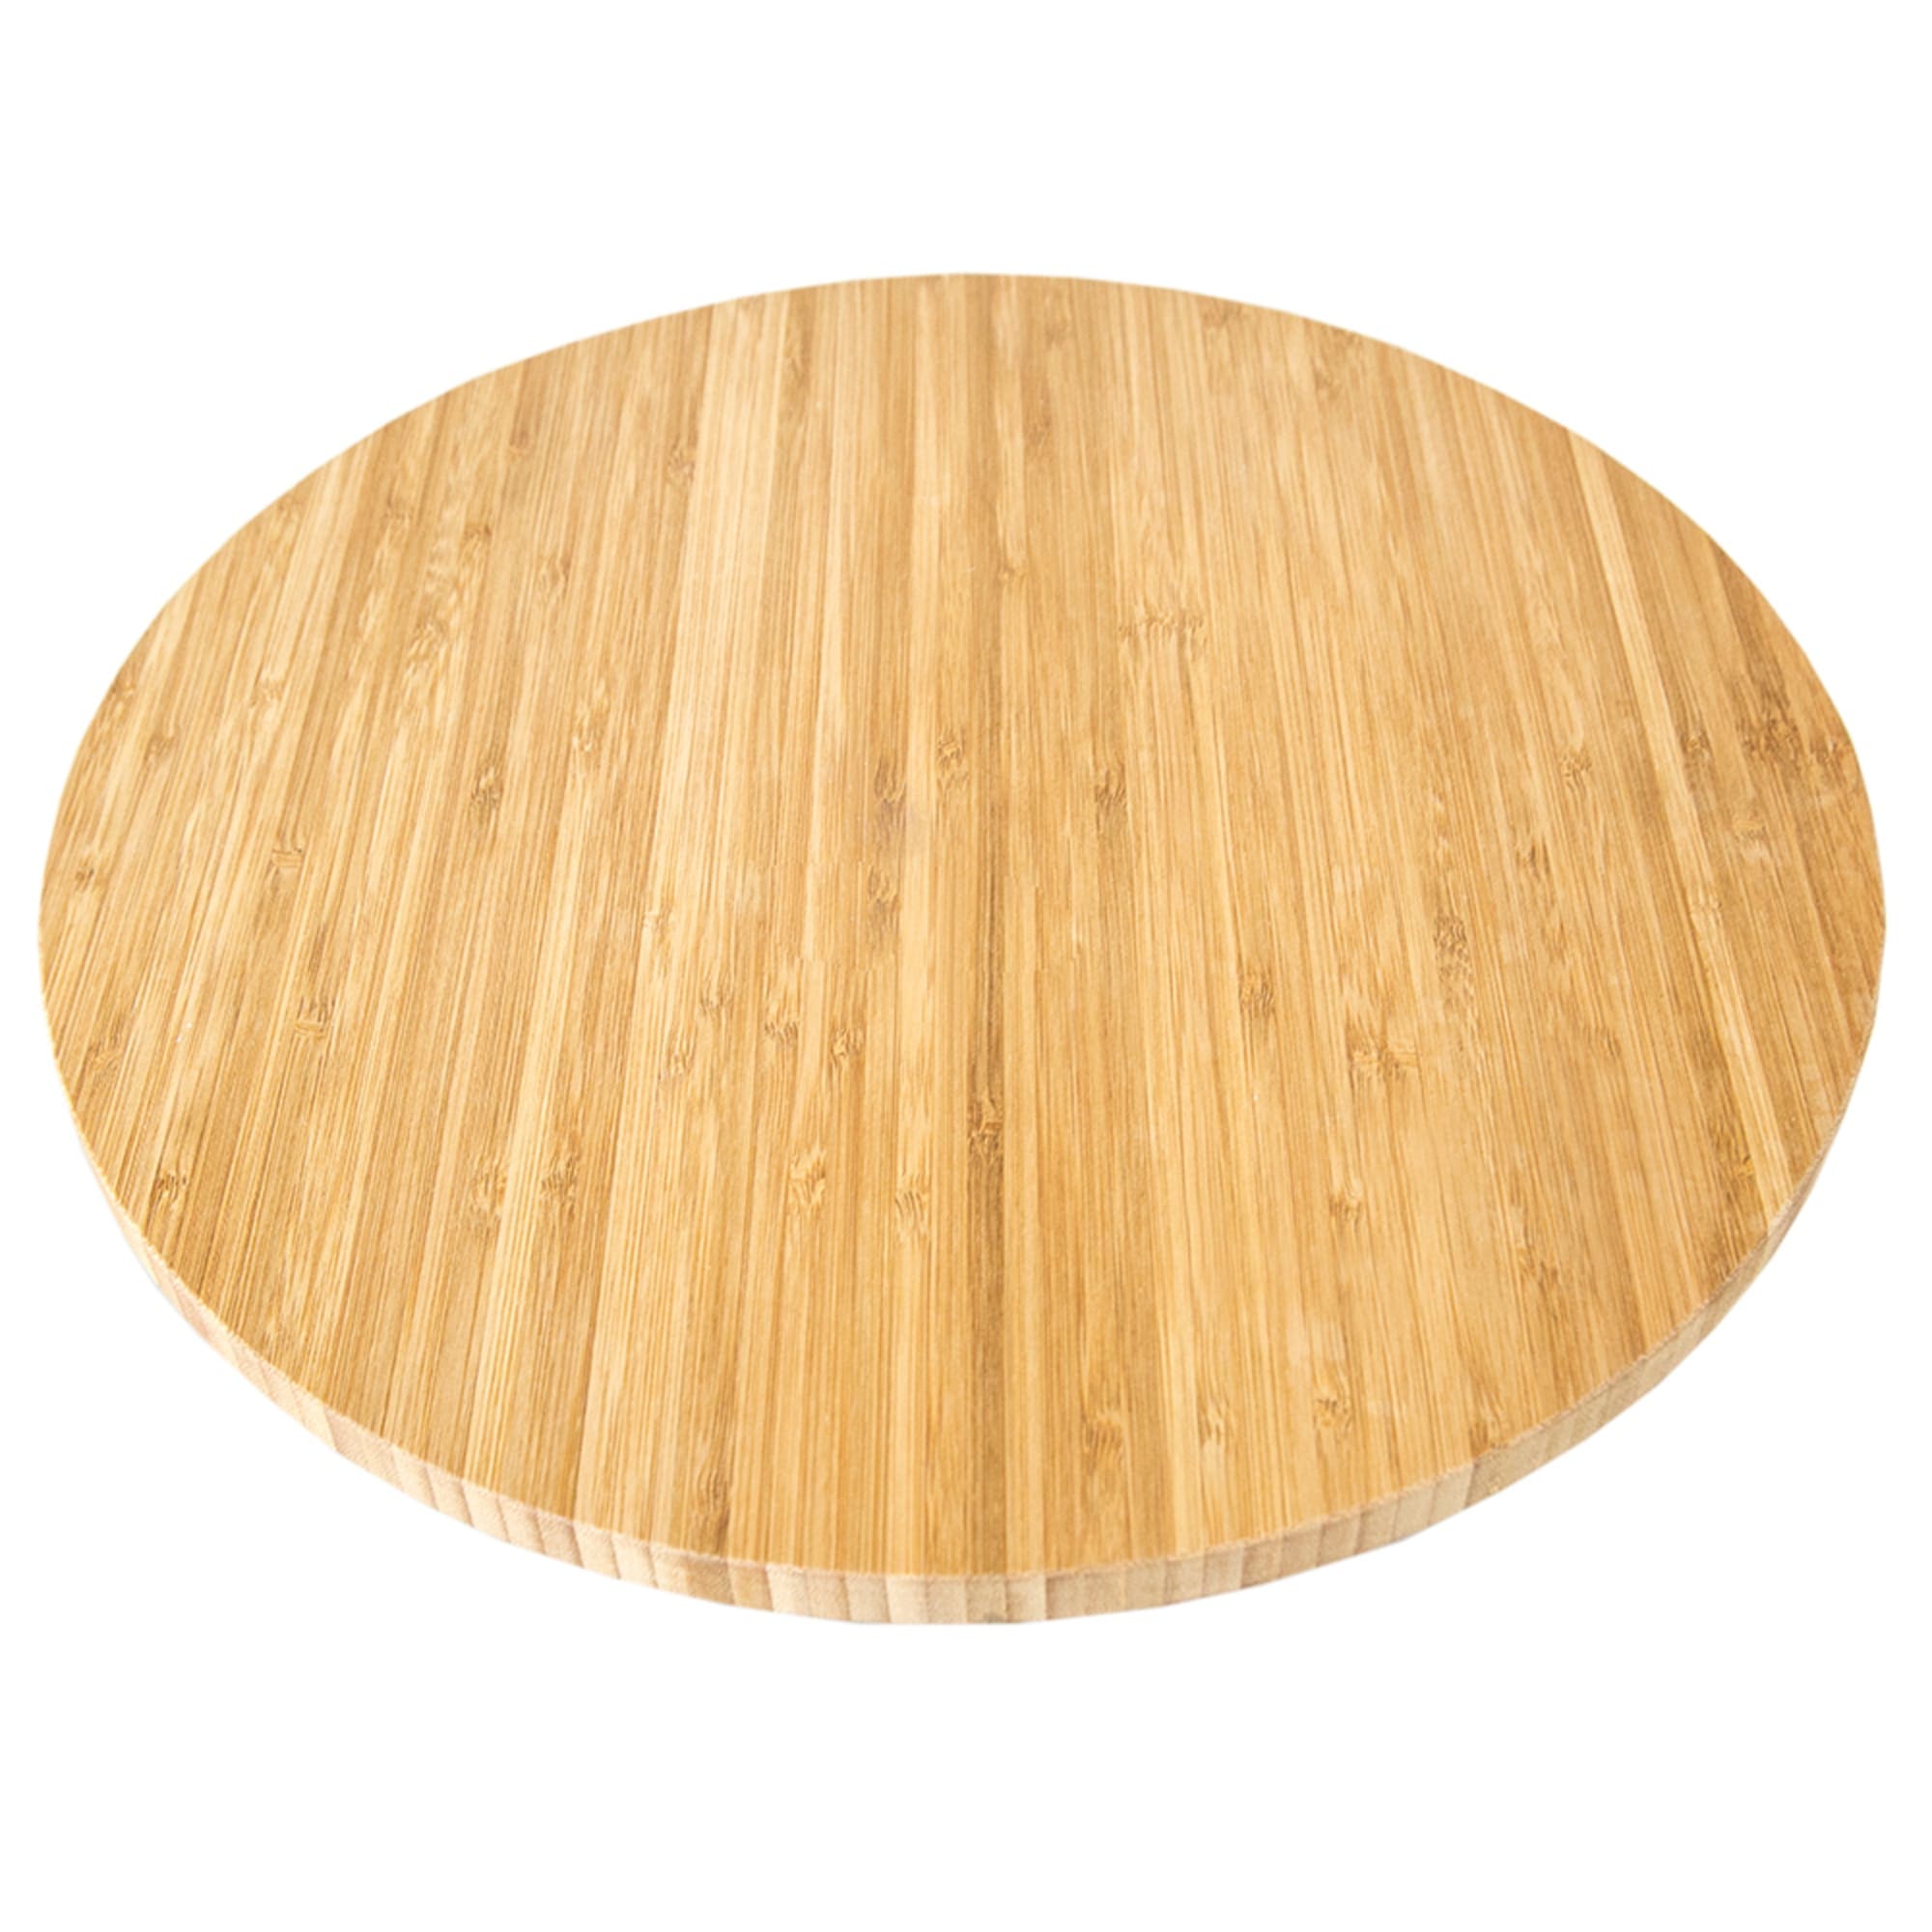 Home Basics Bamboo Lazy Susan, (13.5-inch Diameter) $10.00 EACH, CASE PACK OF 6